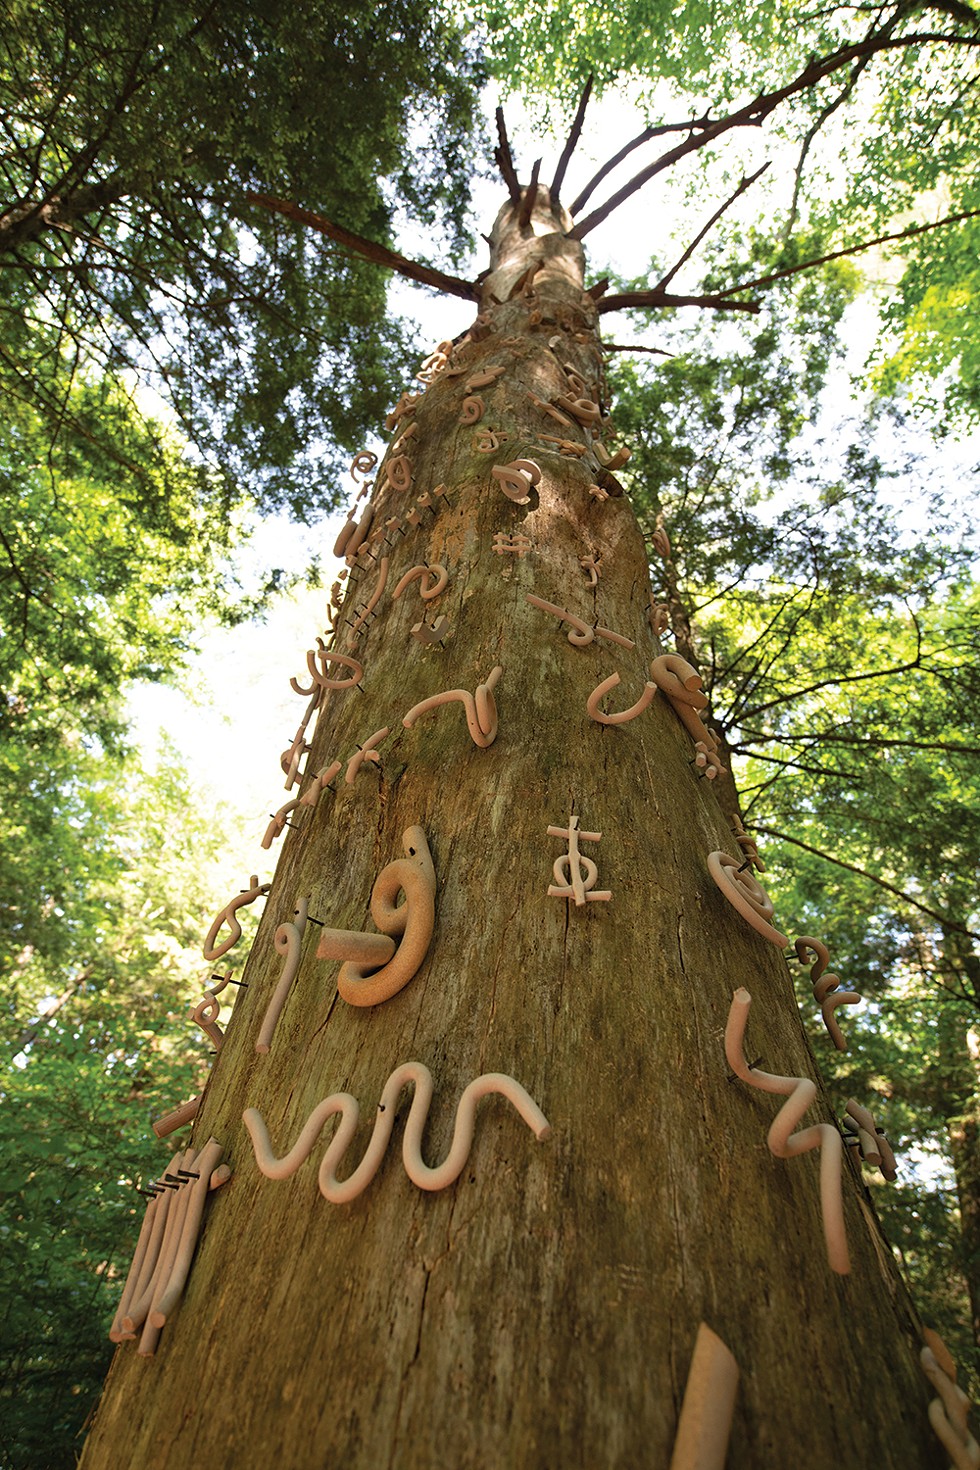 Wisdom. Eastern white pine, ceramics, steel. A very old, standing dead tree continues to provide vital information and resources for younger trees. - PHOTO: KARI GIORDANO